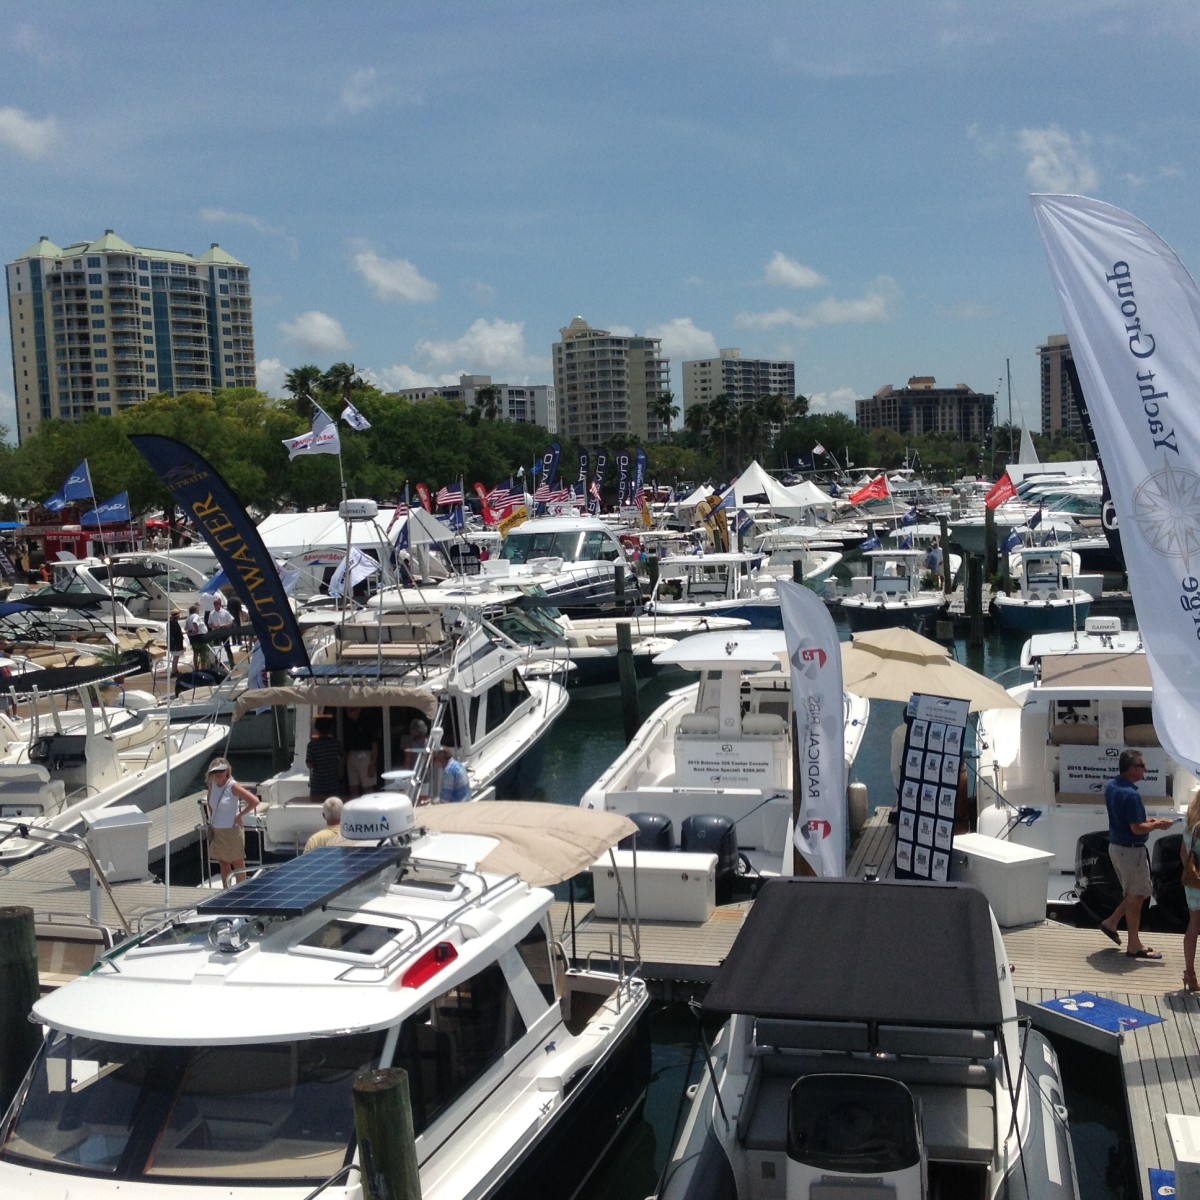 The 33rd annual Suncoast Boat Show, which was held last weekend, saw a significant gain in attendance. The event also featured more boats this year.